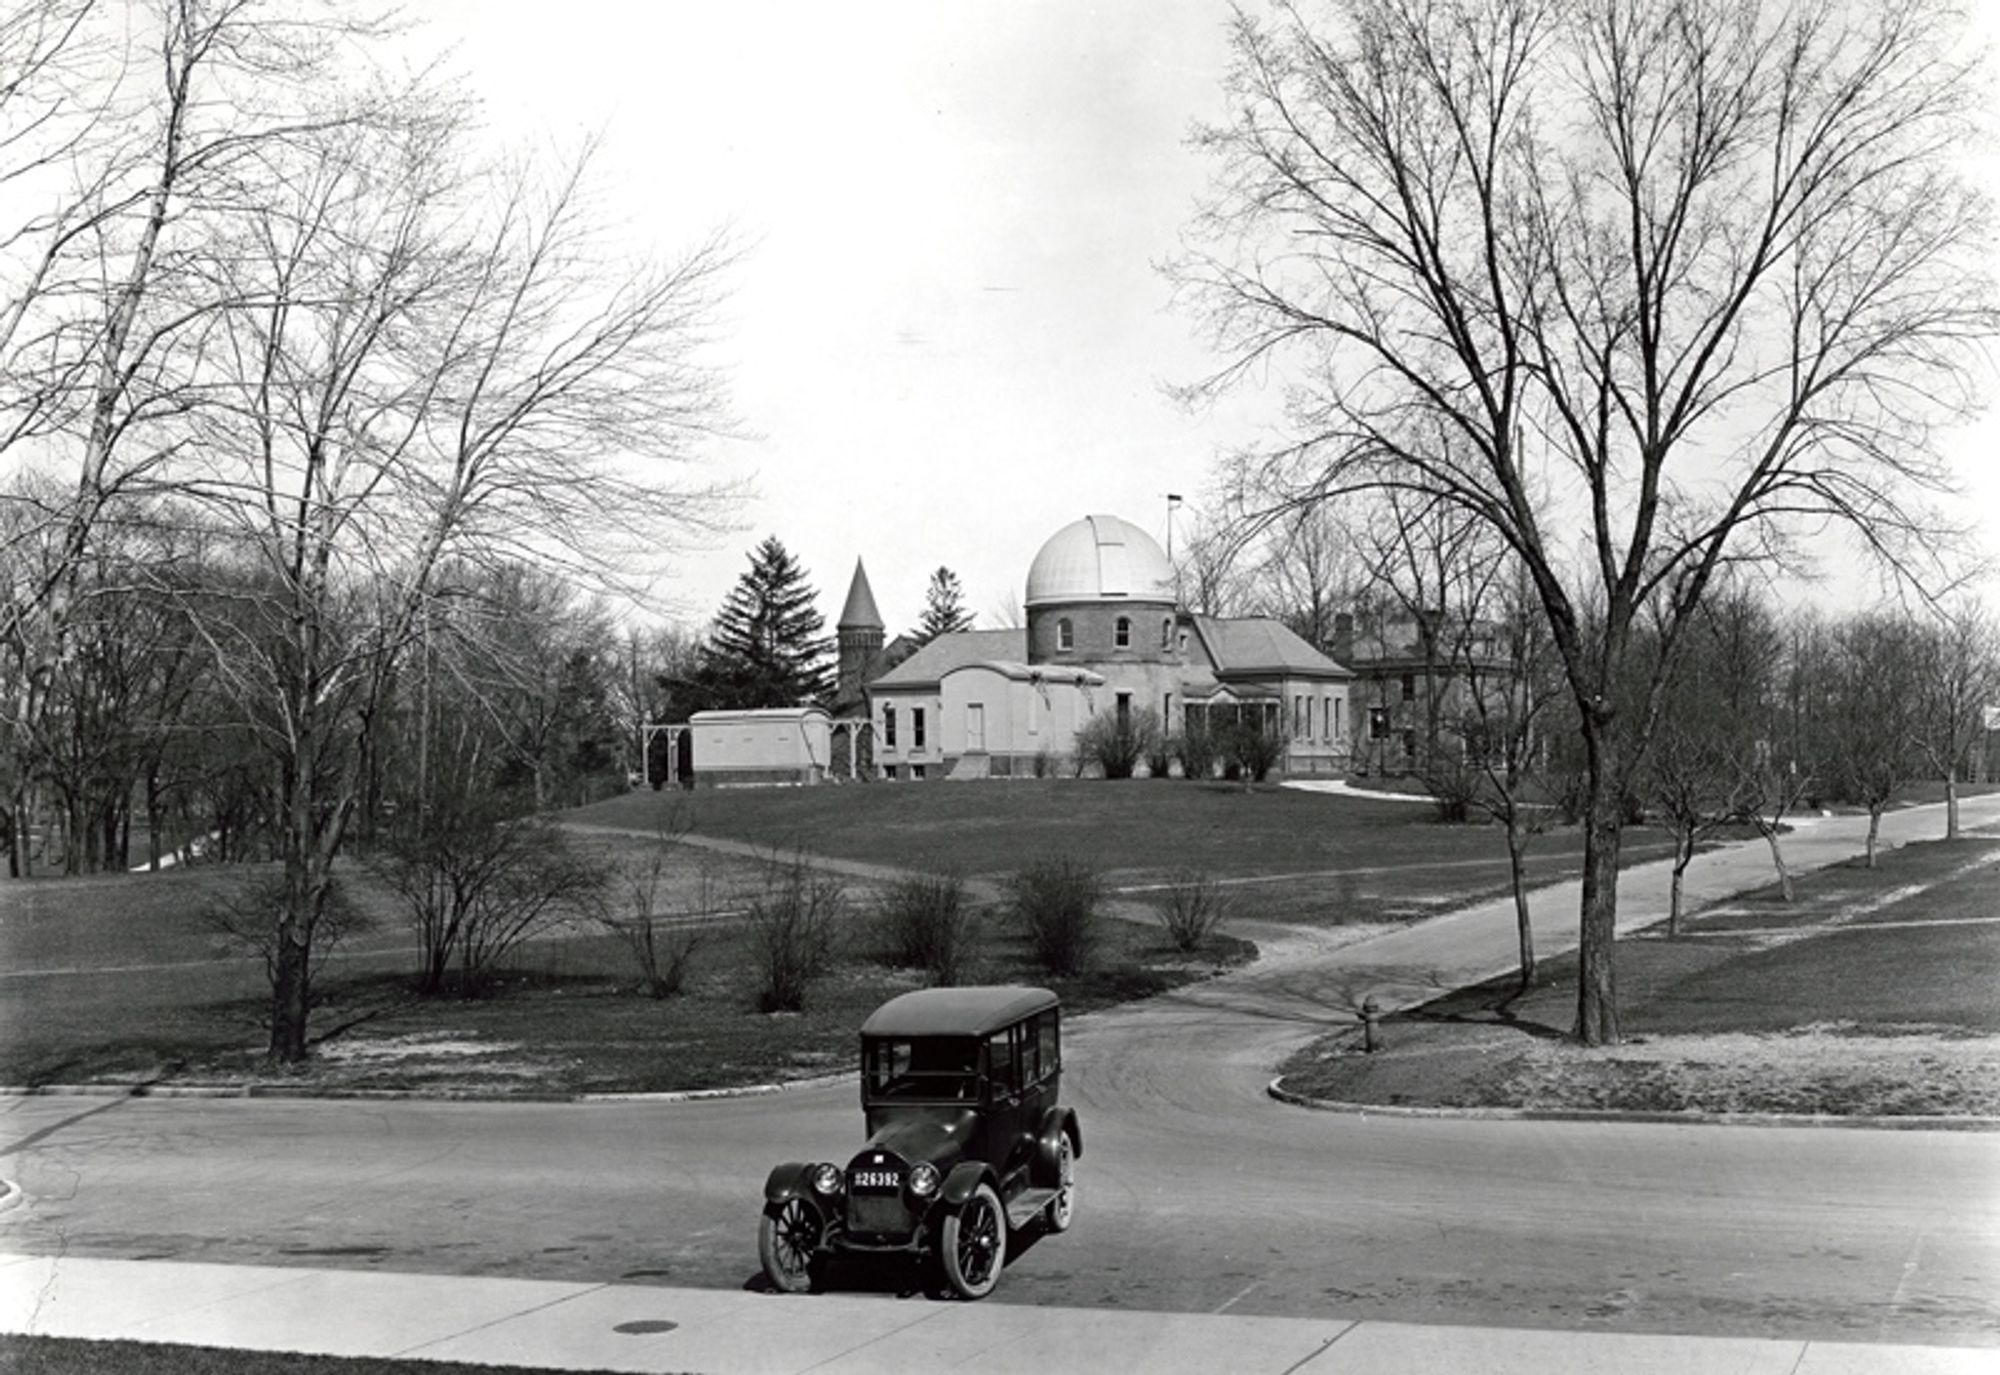 An old photograph taken of an observatory from afar.